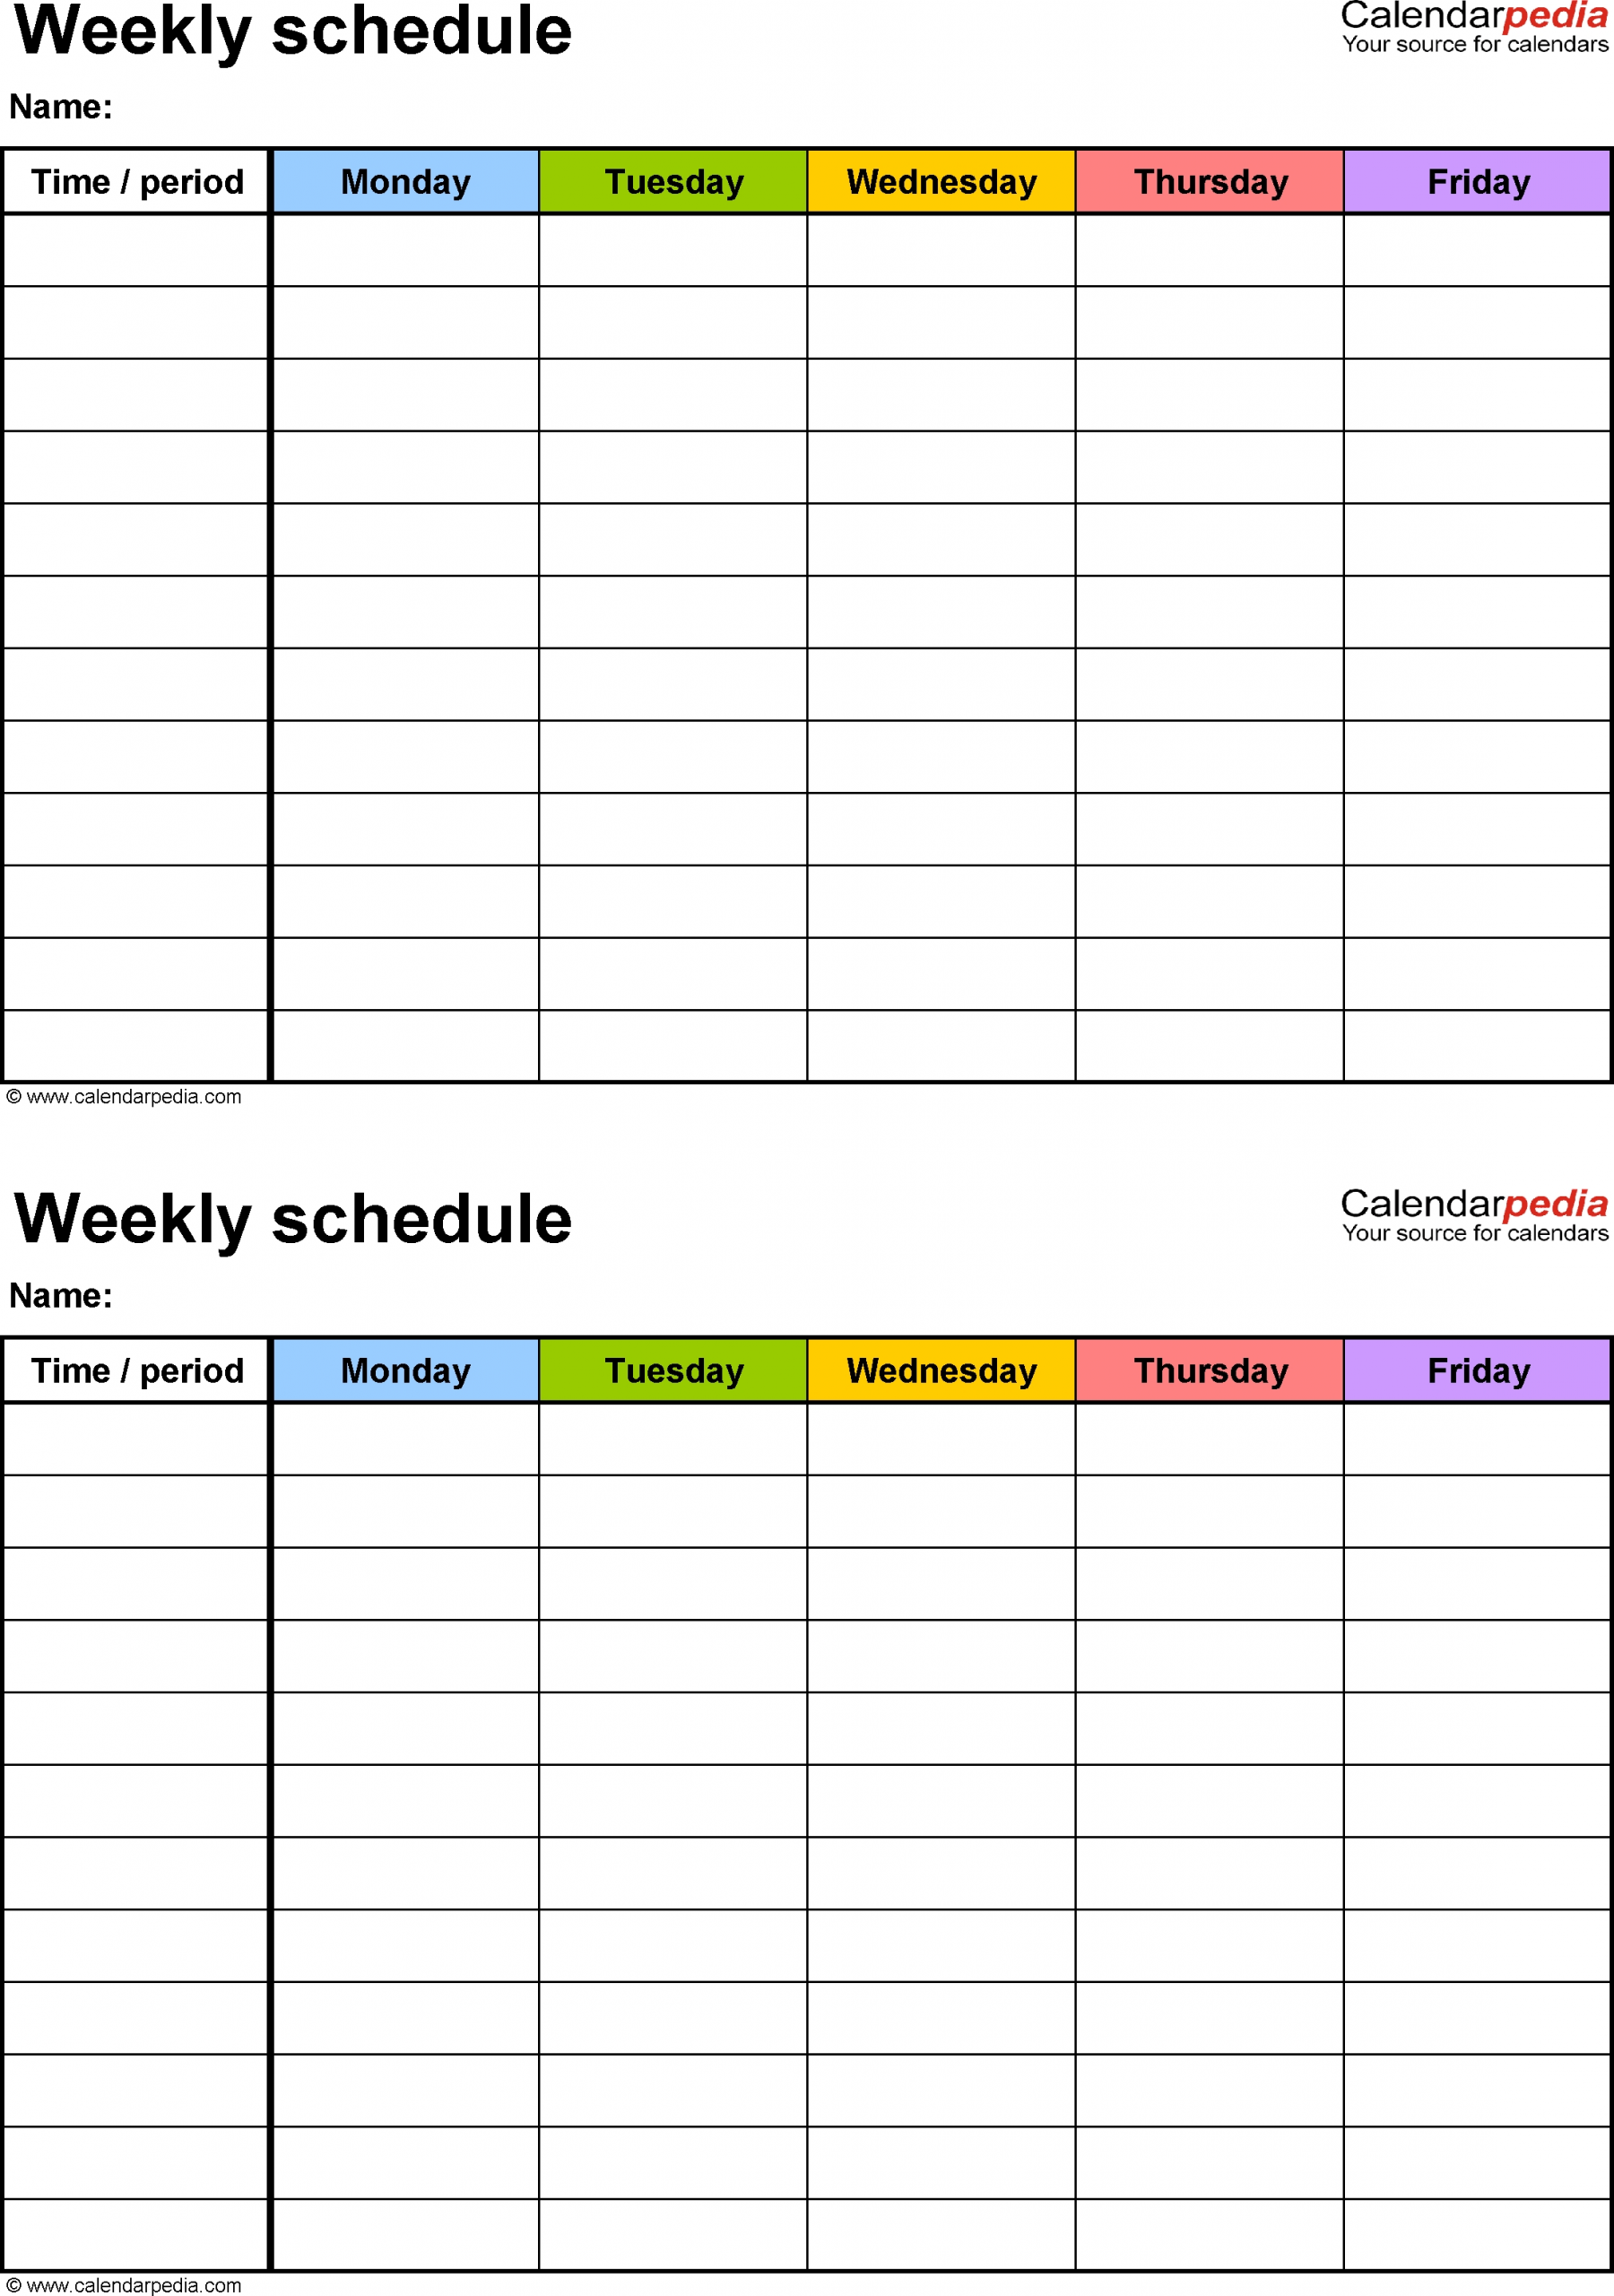 Free Weekly Schedule Templates For Pdf 18 Templates